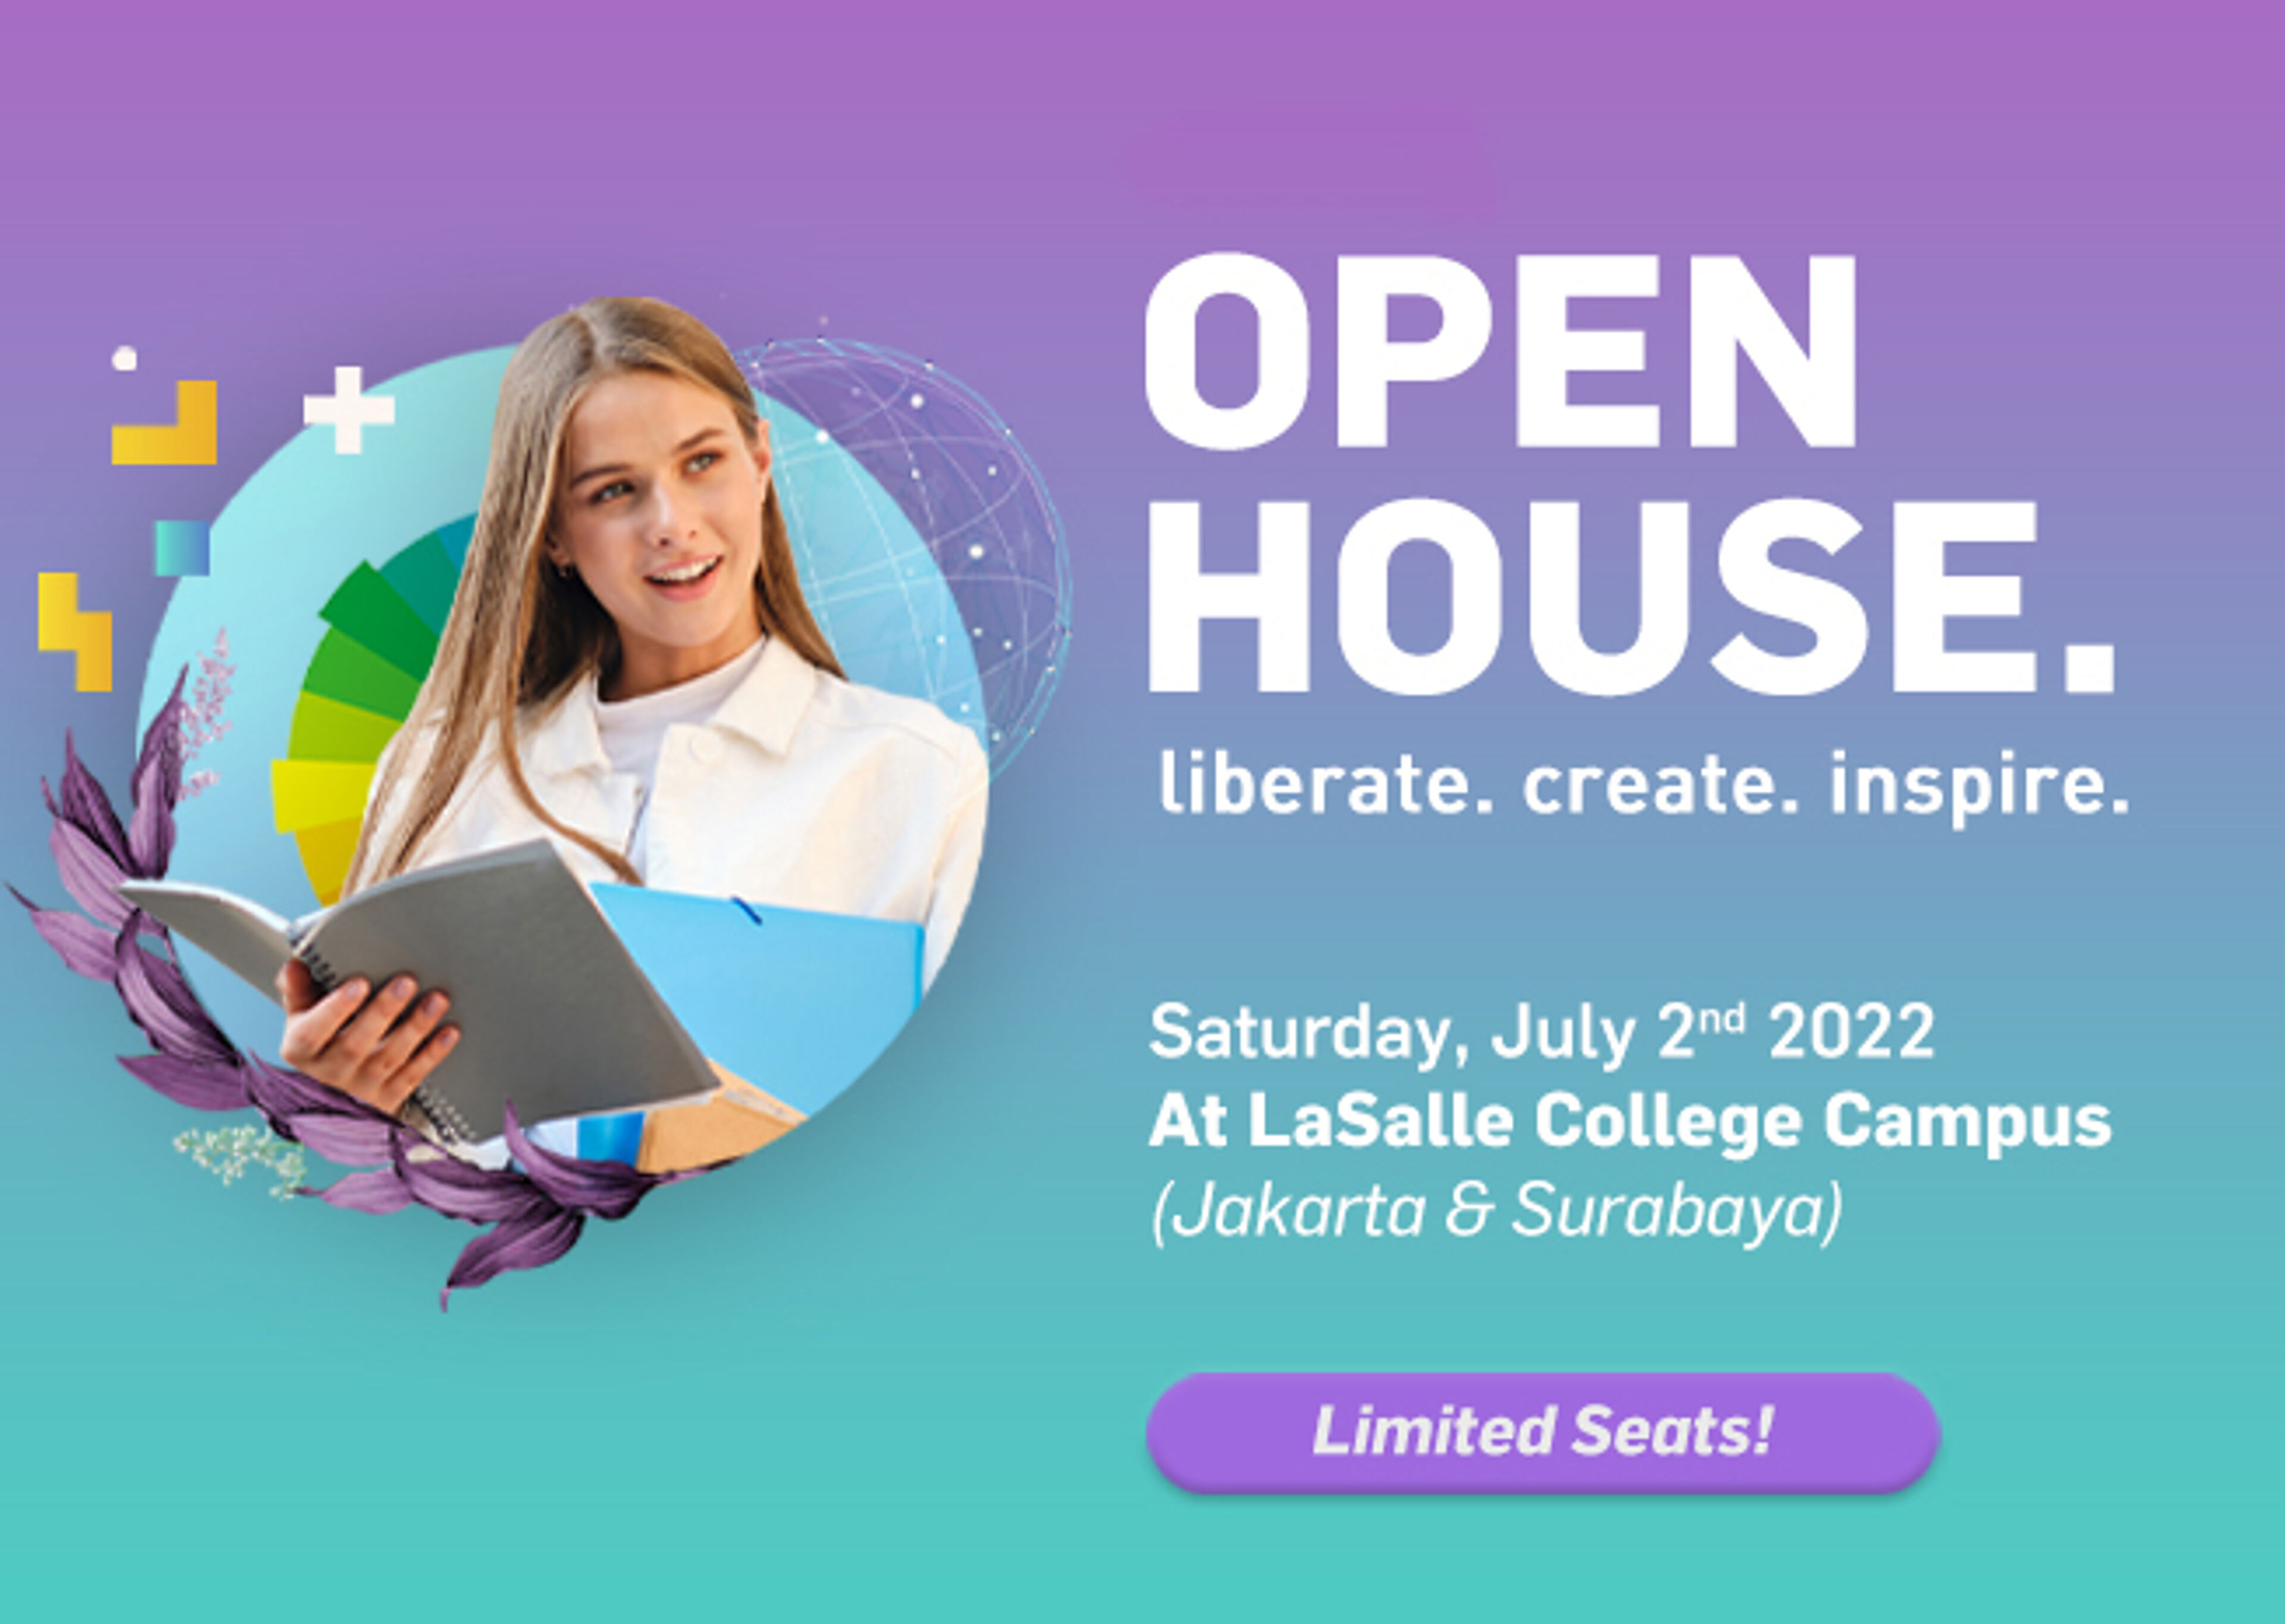 An inviting ad for an open house at LaSalle College Campus, with vibrant graphics and a message of inspiration, scheduled for Saturday, July 2nd, 2022.